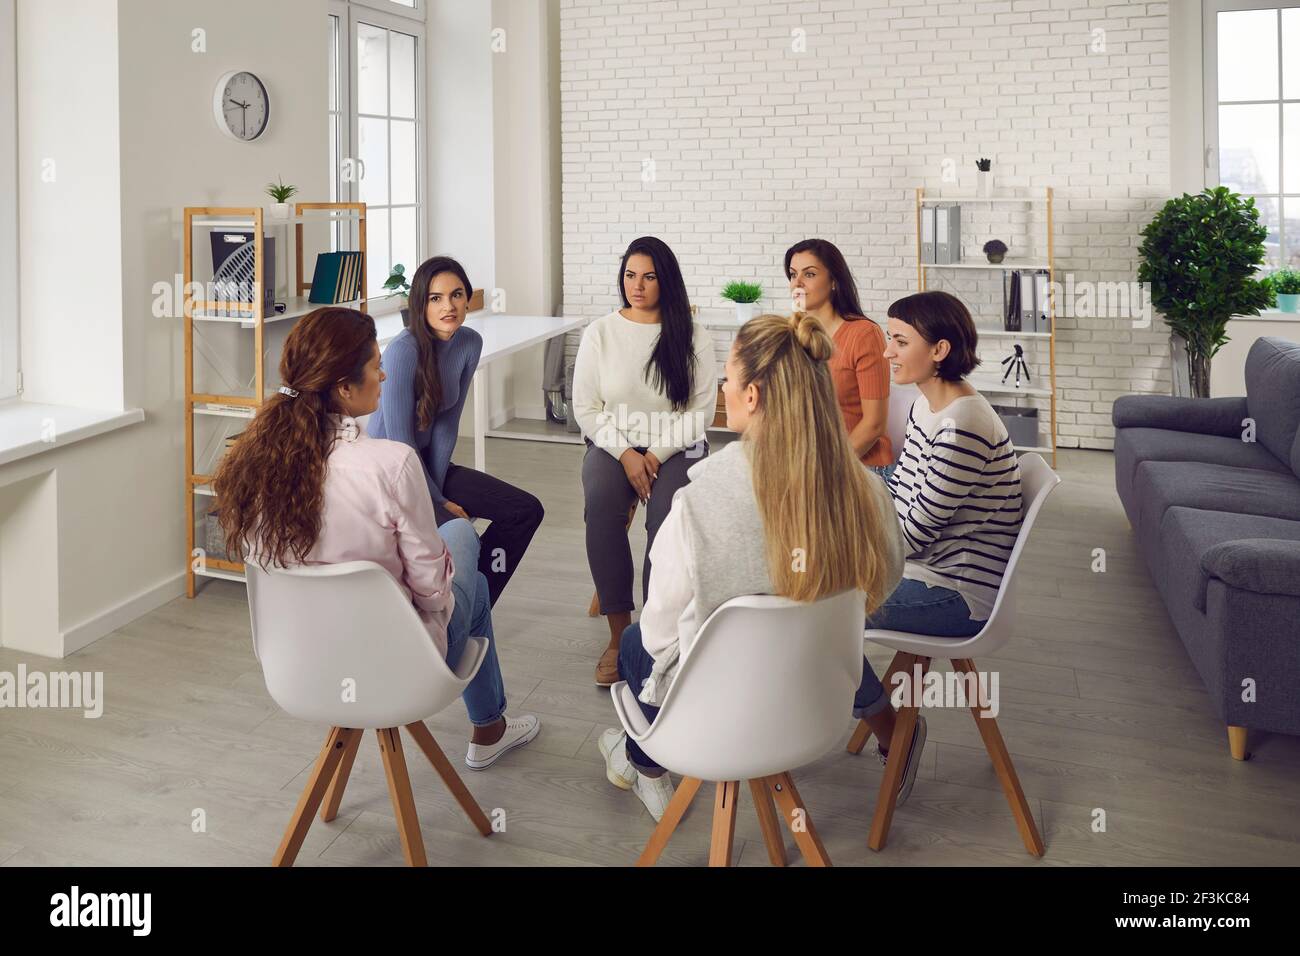 Women telling their stories, discussing life situations, working out solutions together Stock Photo